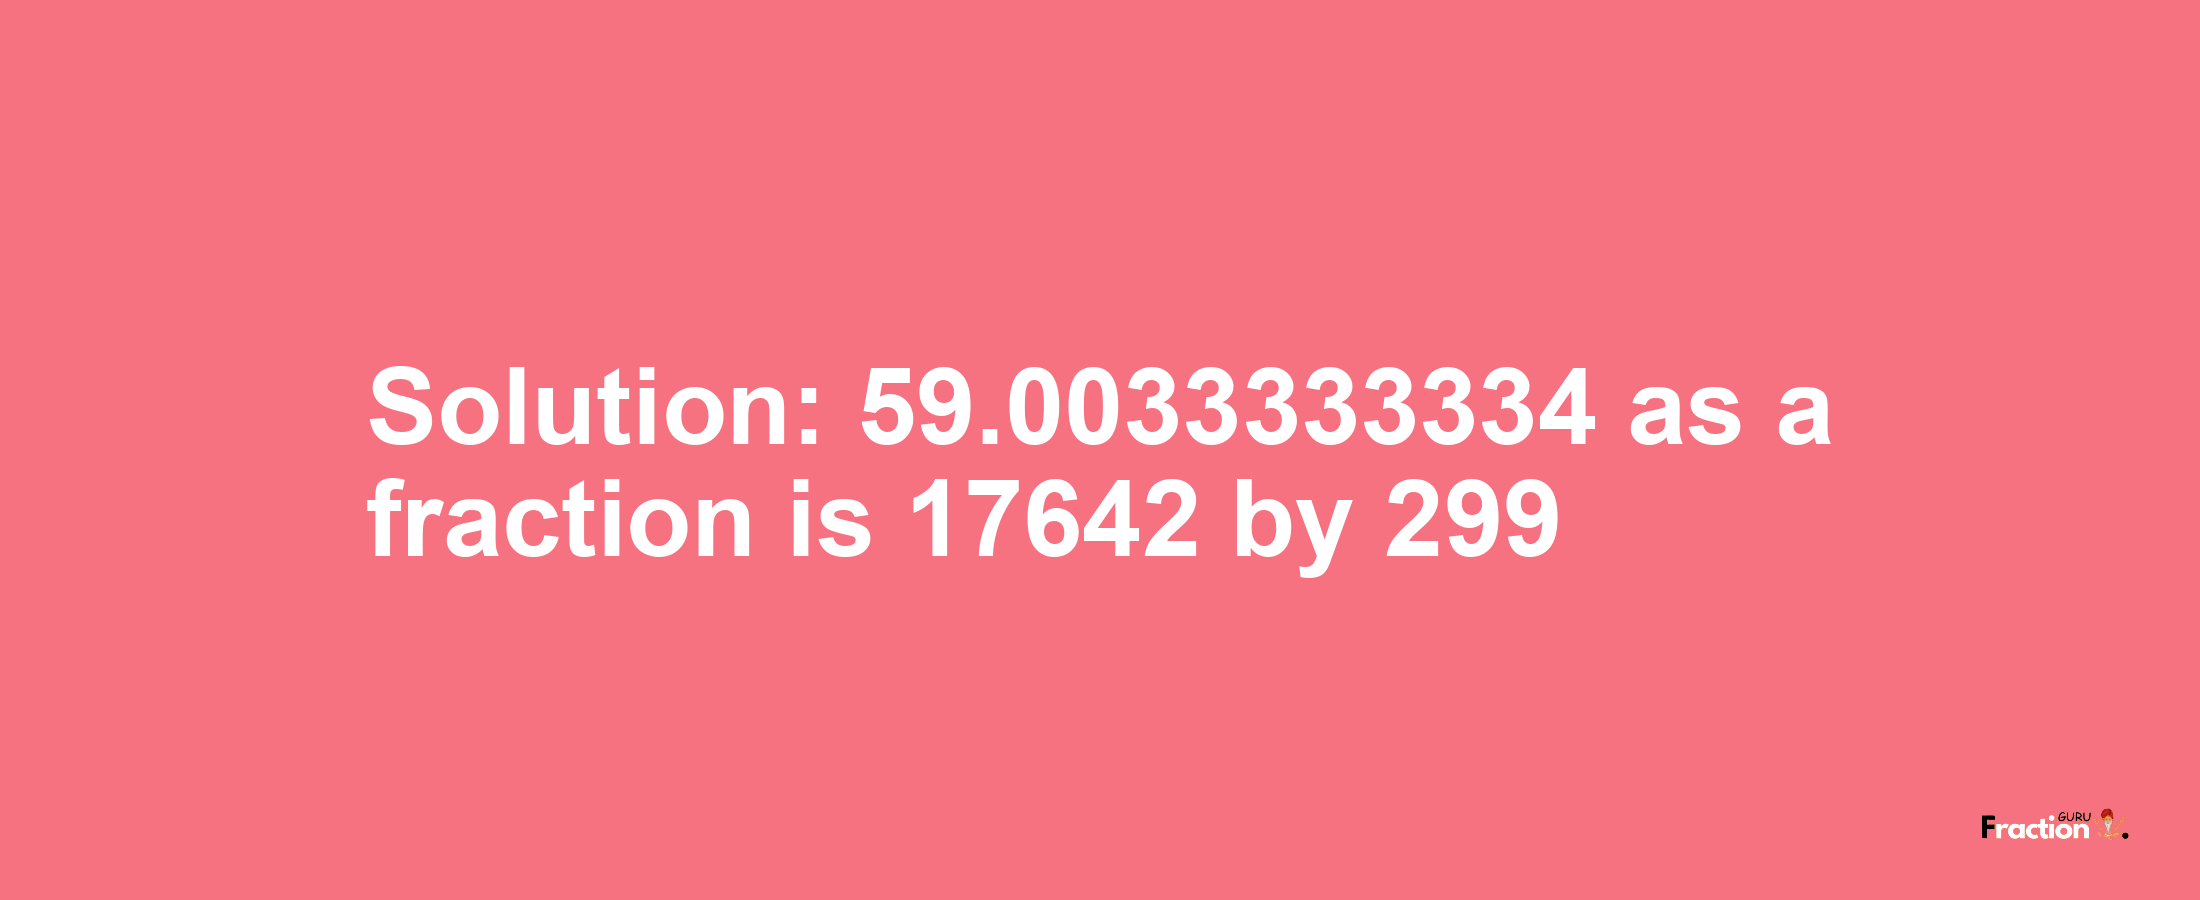 Solution:59.0033333334 as a fraction is 17642/299